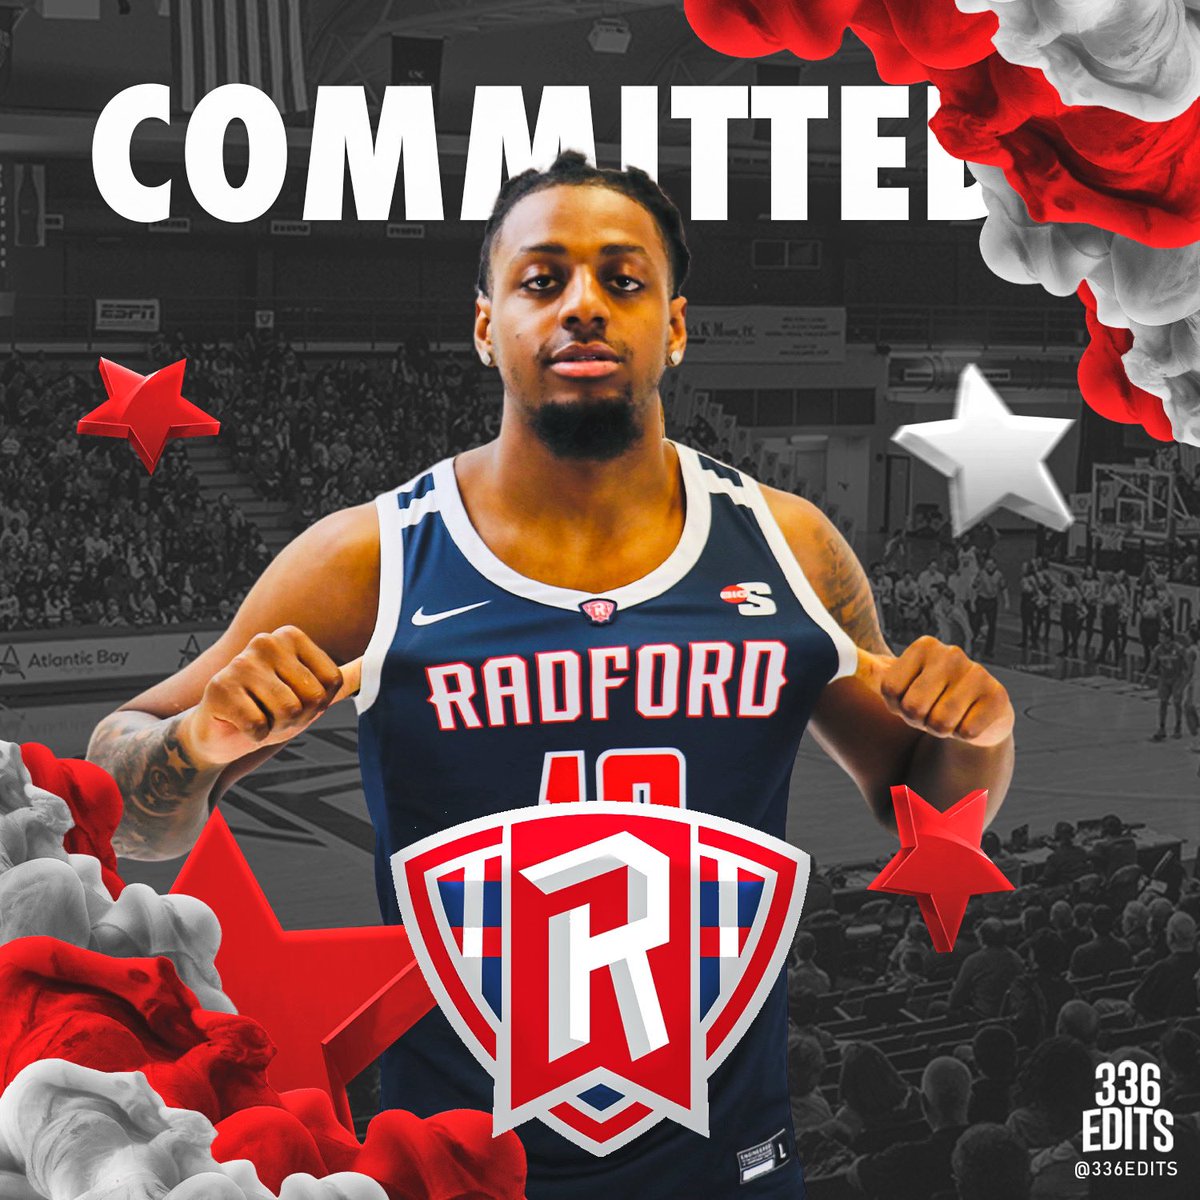 sorry 4 the wait my name hold weight 🛡️ radford what’s good !! 200% committed!